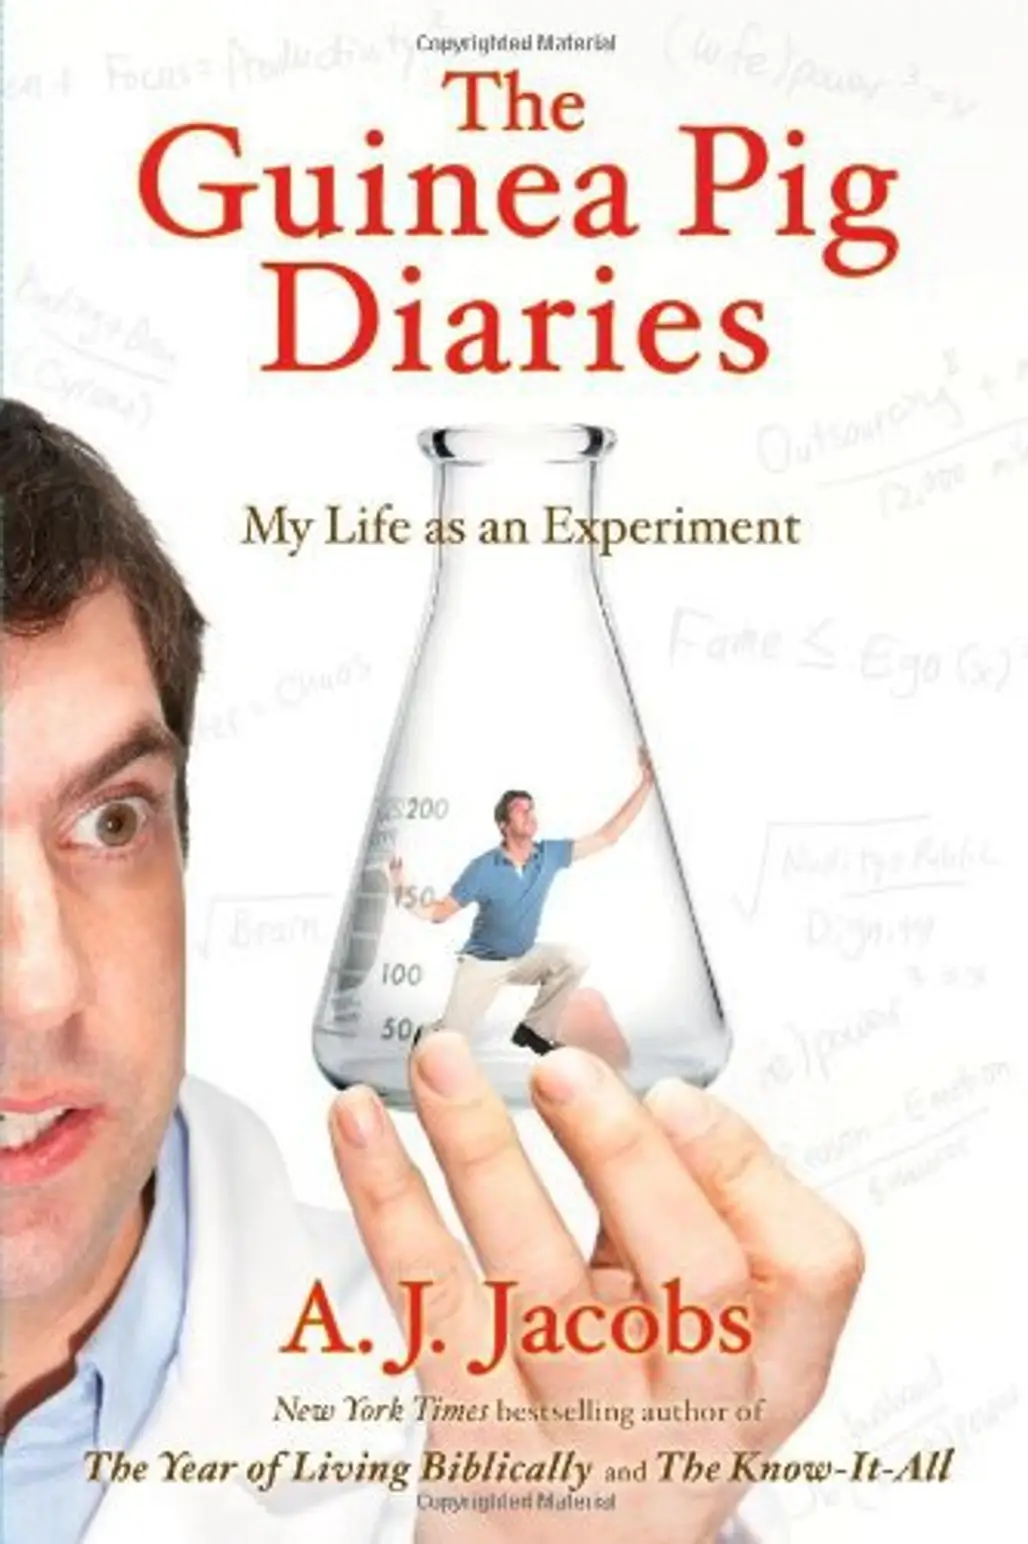 “the Guinea Pig Diaries: My Life as an Experiment” by a.J. Jacobs